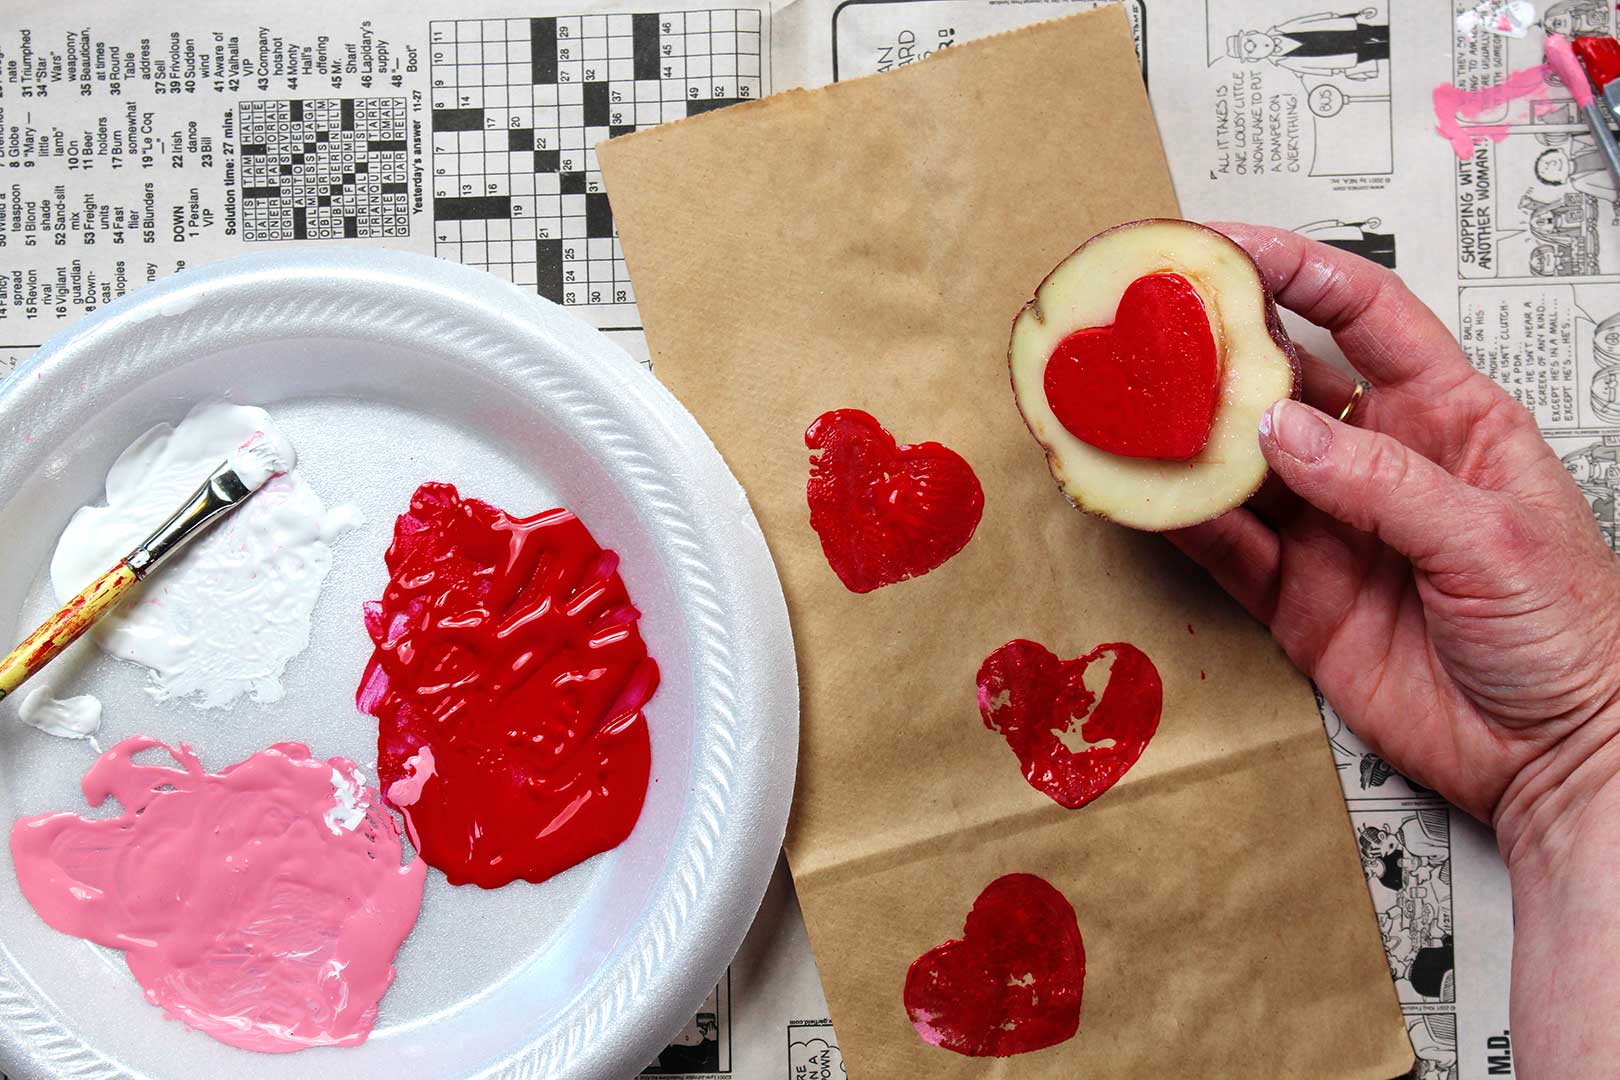 Foam plate with paint swatches, paper bag with stamped red hearts and a hand holding a potato heart stamp on news print background.